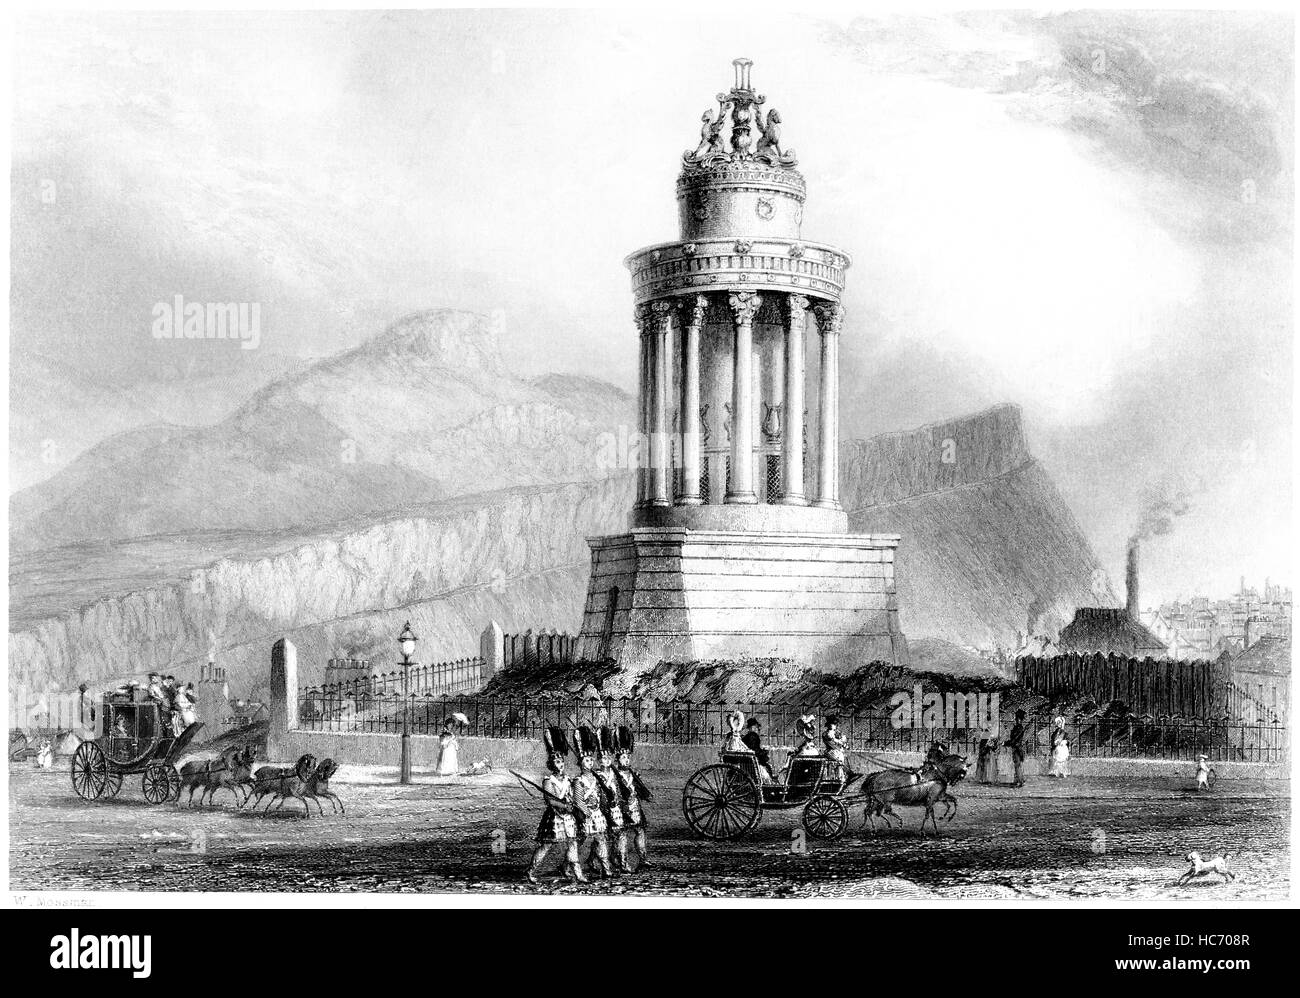 Engraving of Burns Monument on the Calton Hill scanned at high resolution from a book printed in 1859. Believed copyright free. Stock Photo